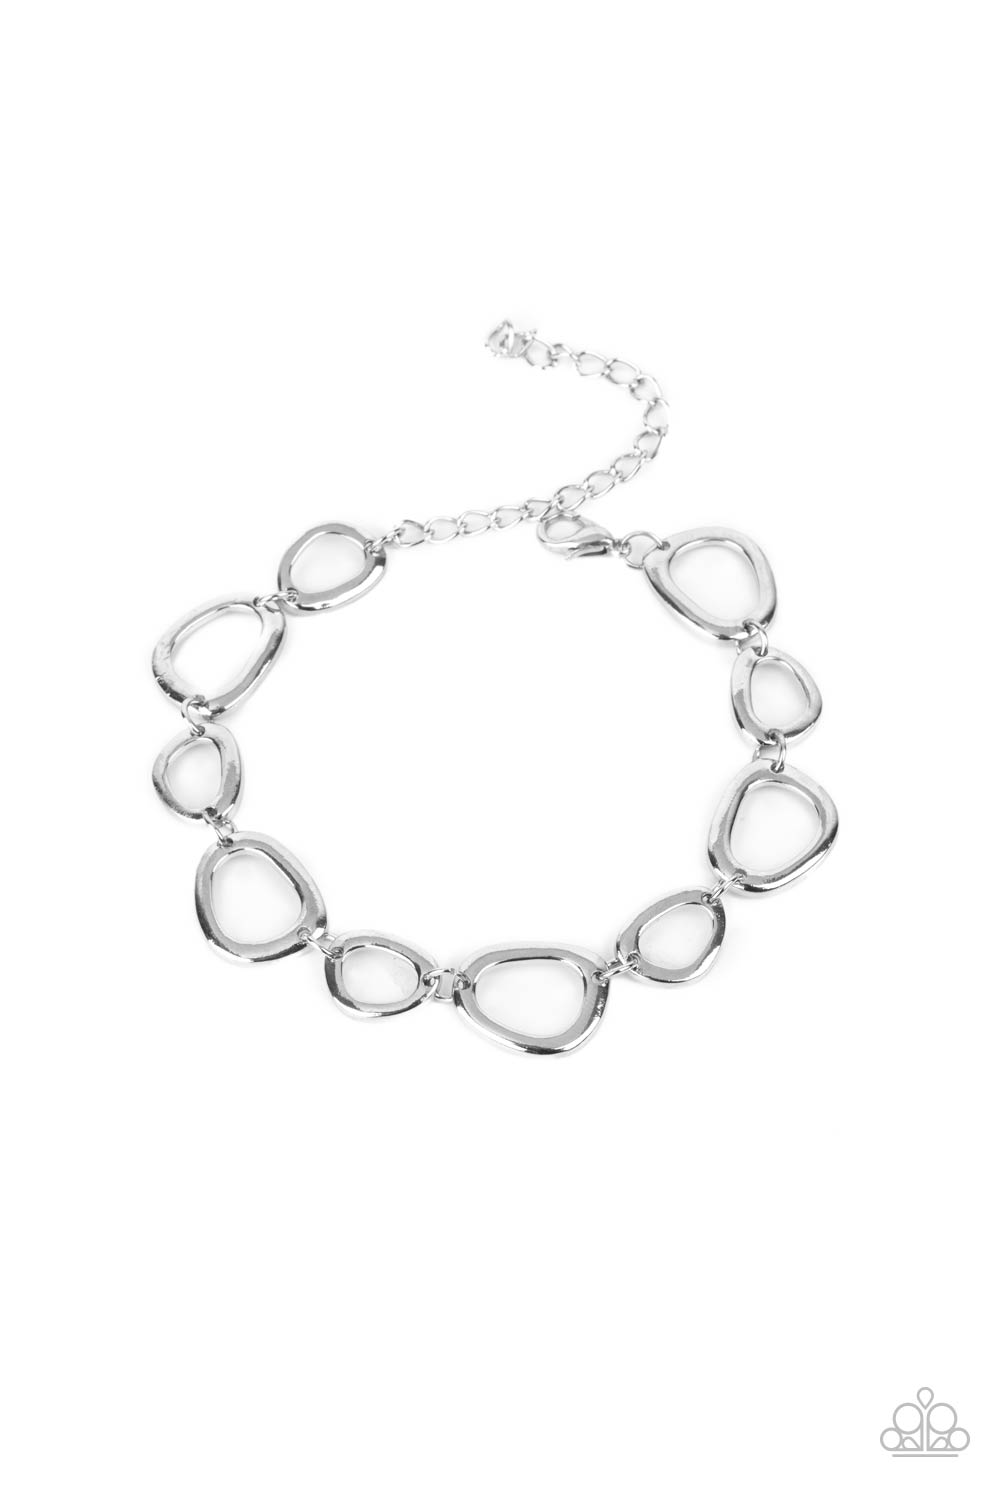 All That Mod Silver Bracelet - Paparazzi Accessories- lightbox - CarasShop.com - $5 Jewelry by Cara Jewels